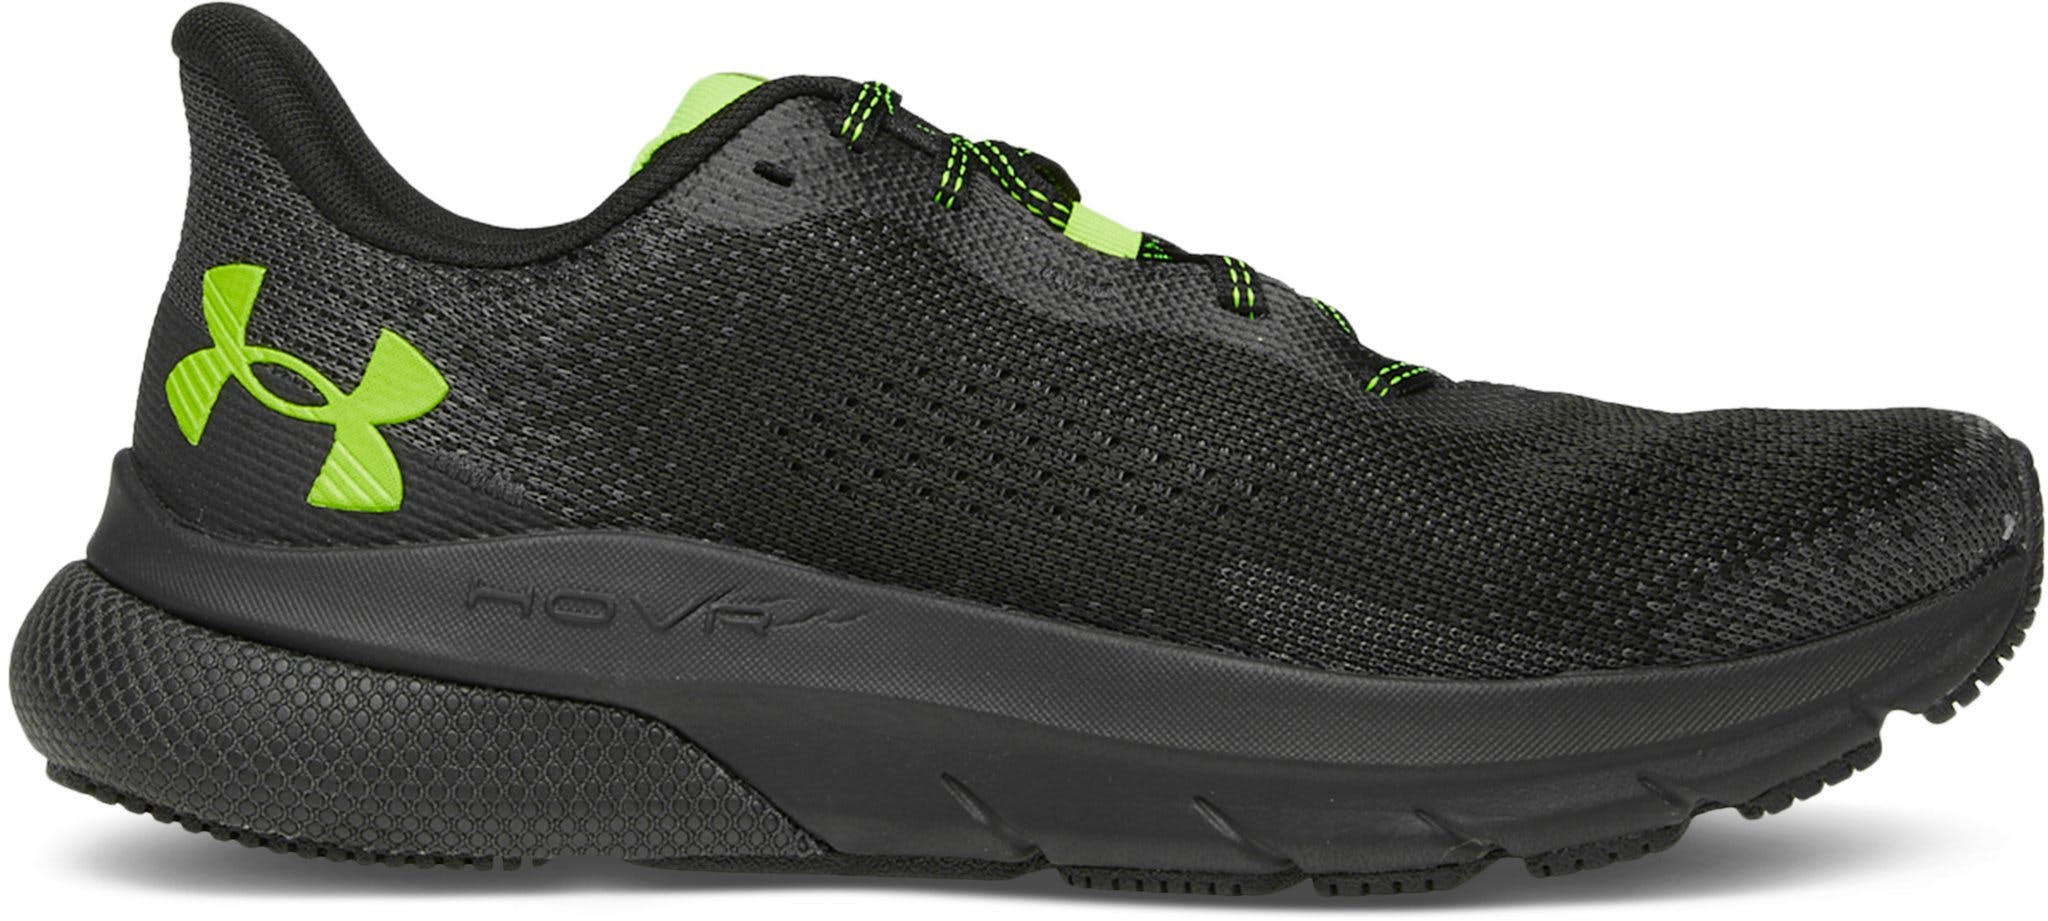 Product image for UA HOVR Turbulence 2 Running Shoes - Men's